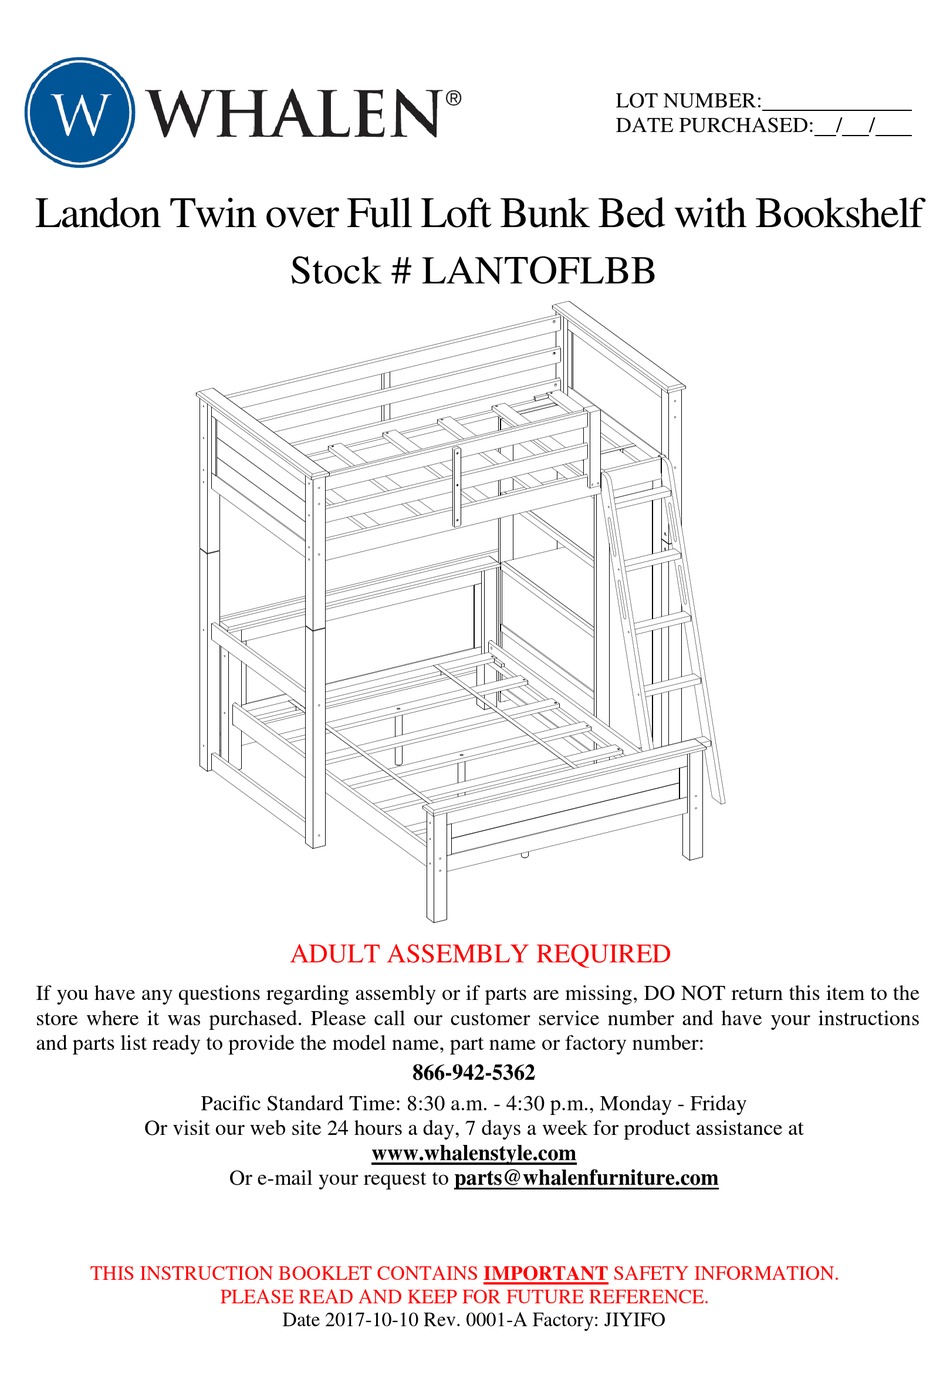 Whalen Lantoflbb Assembly Instructions, Whalen Twin Over Full Bunk Bed